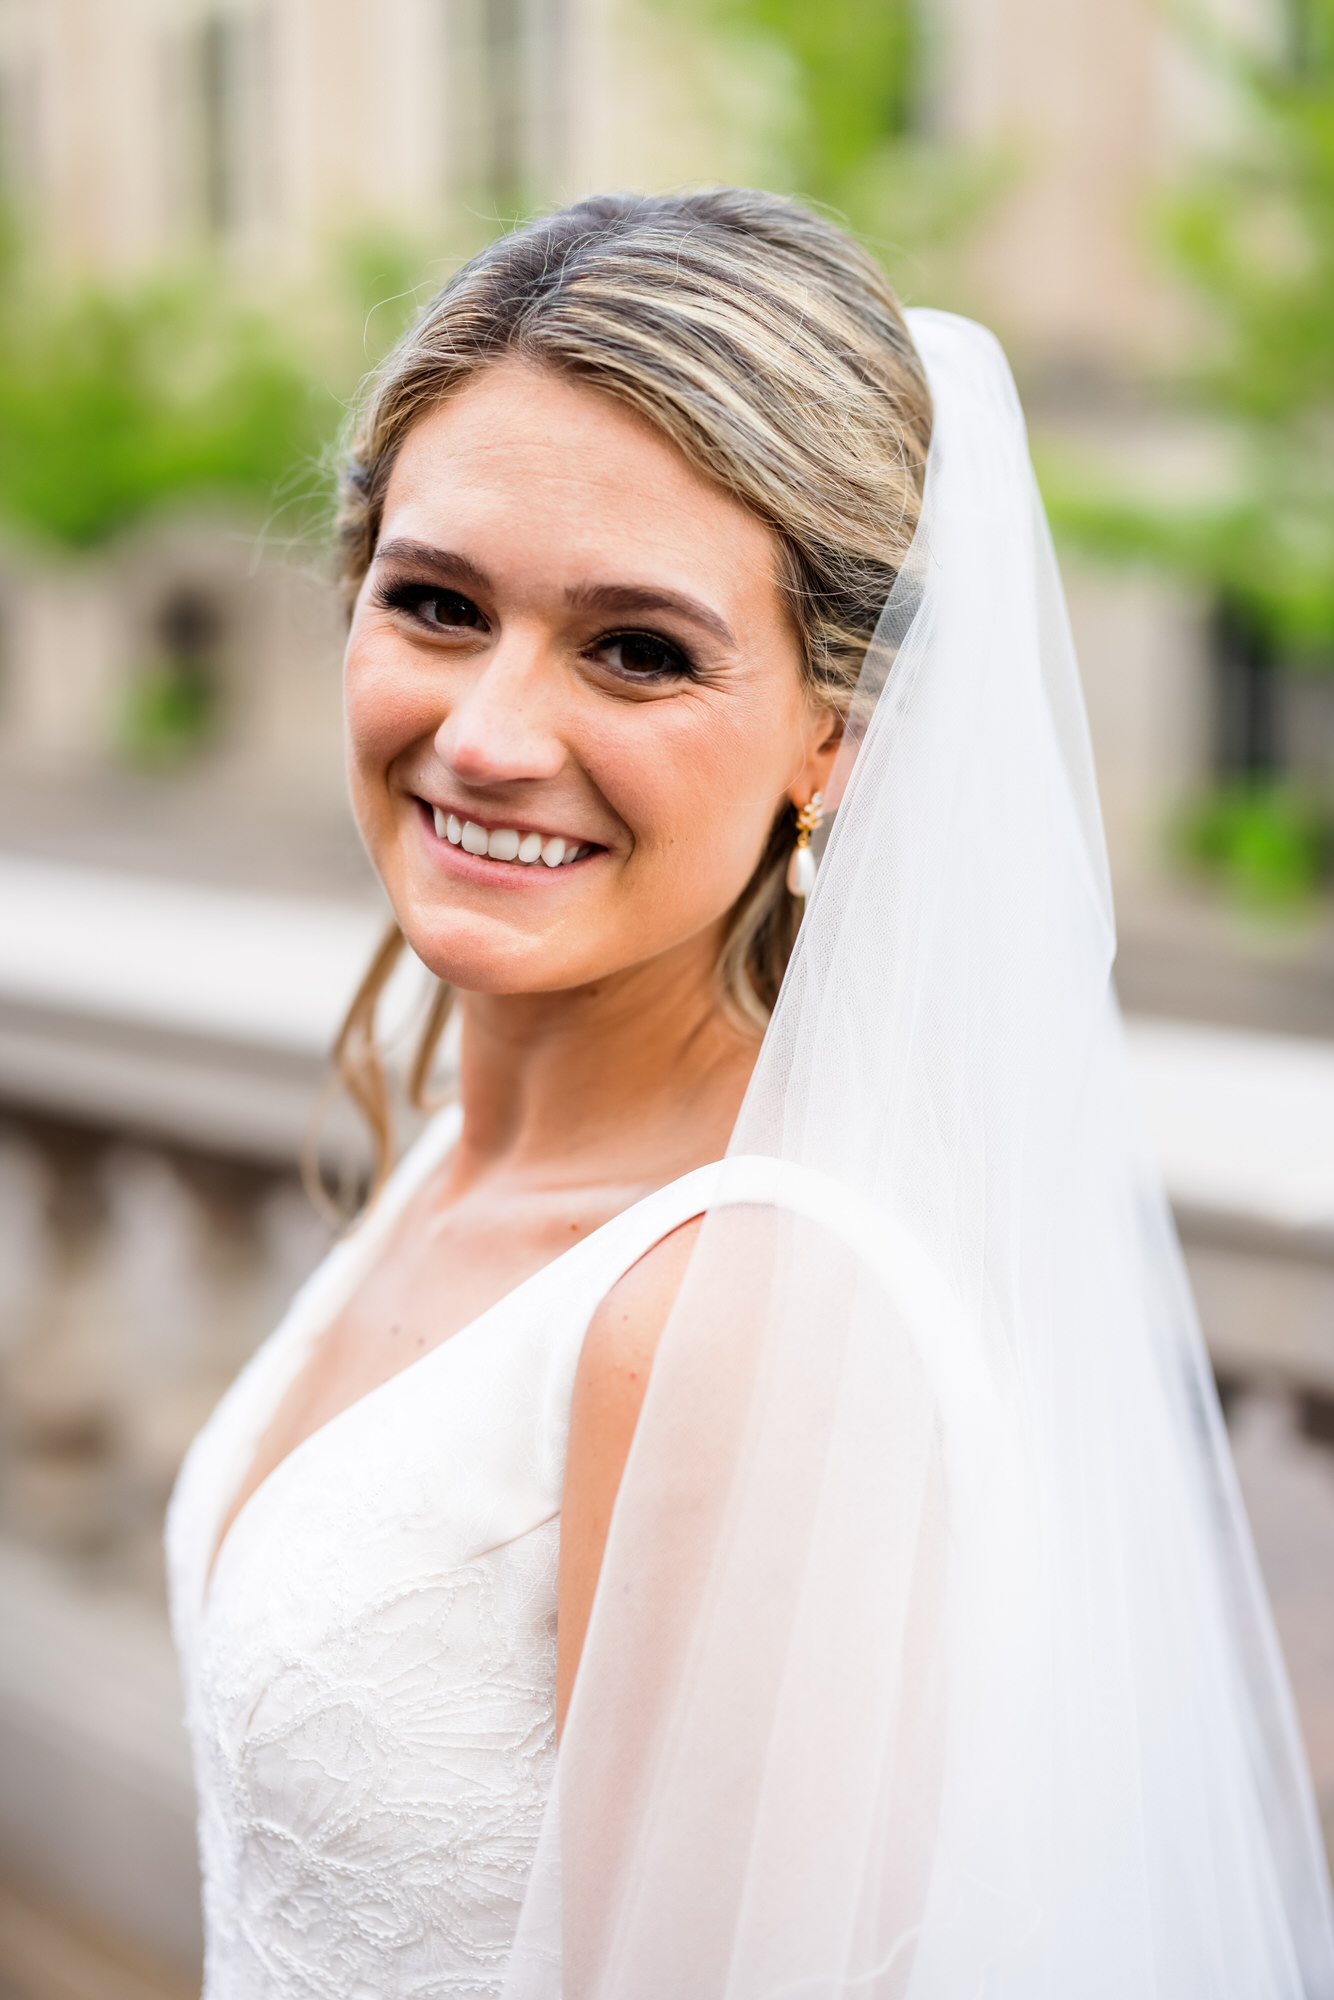 blonde woman in bridal gown and veil smiling at camera